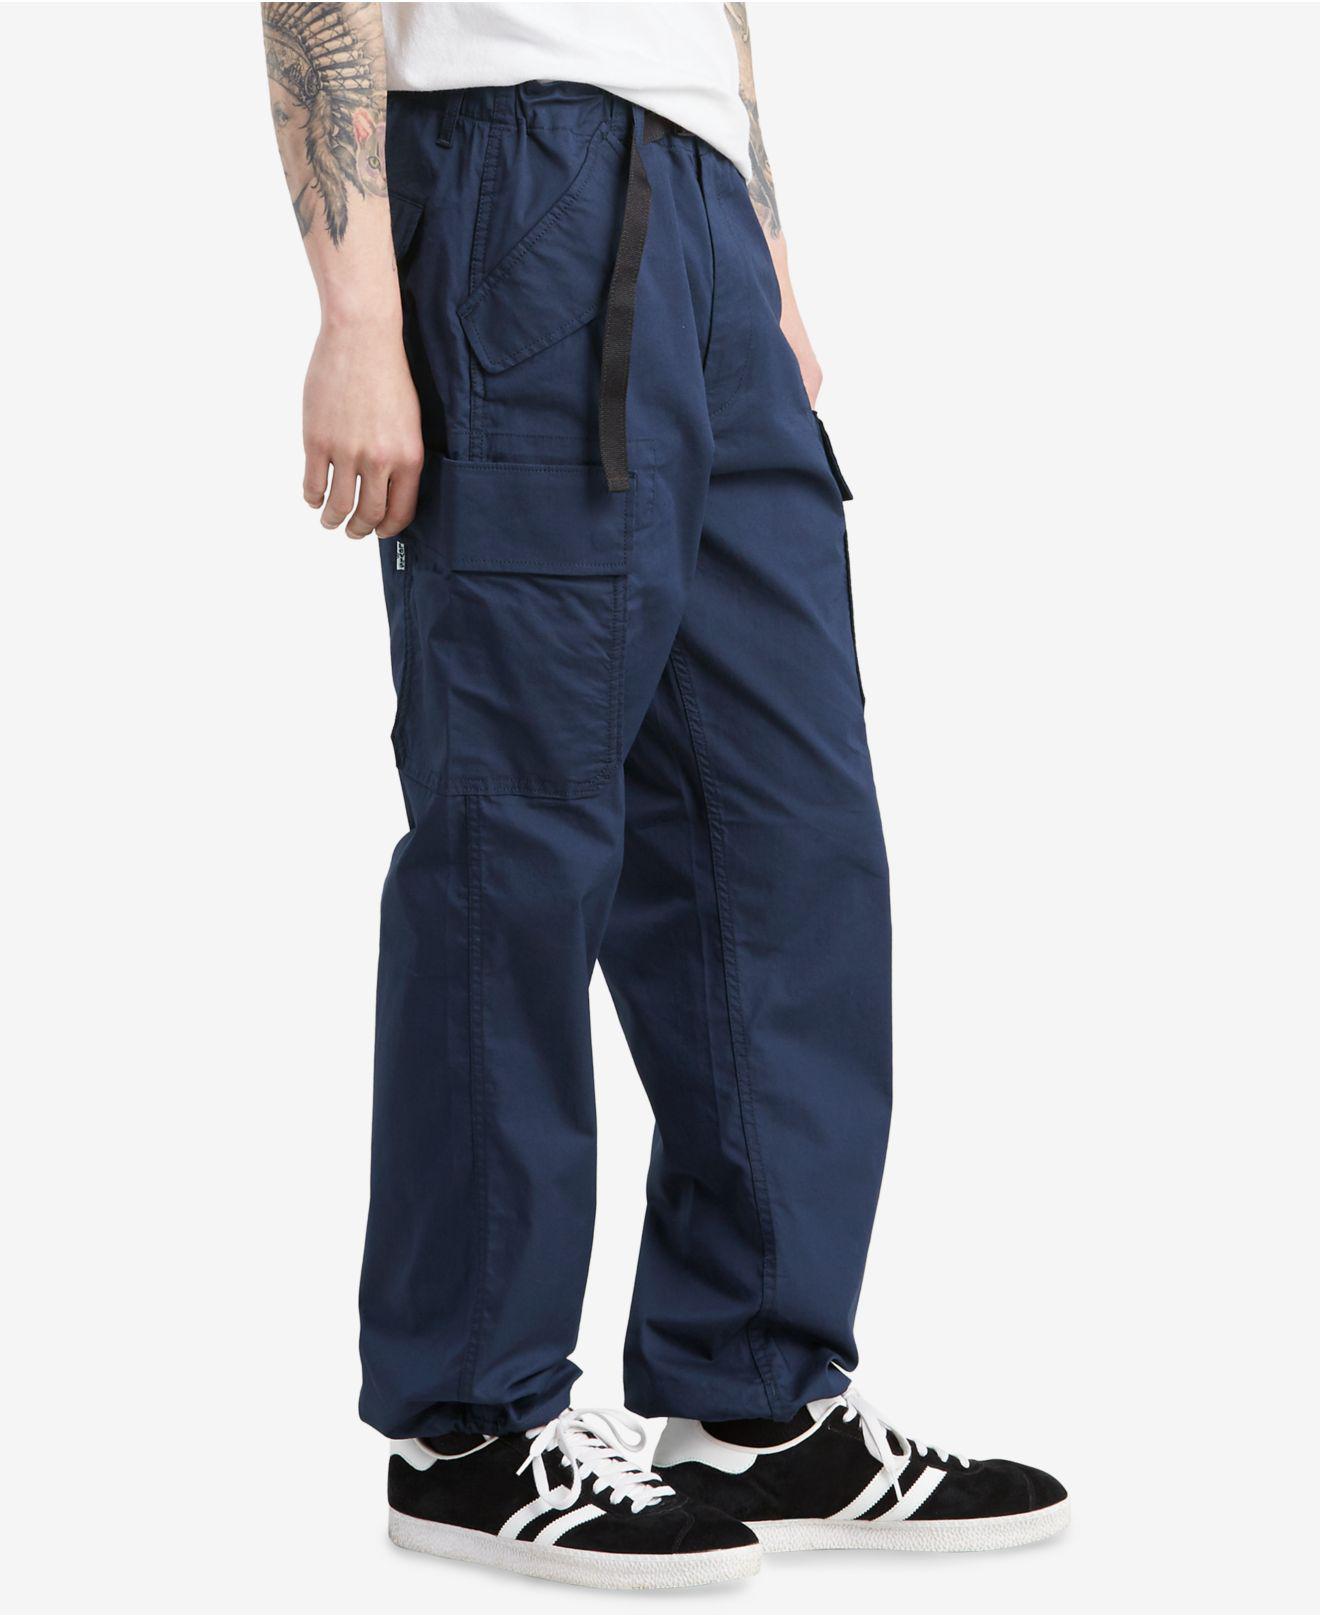 carrier cargo pants Online Shopping 